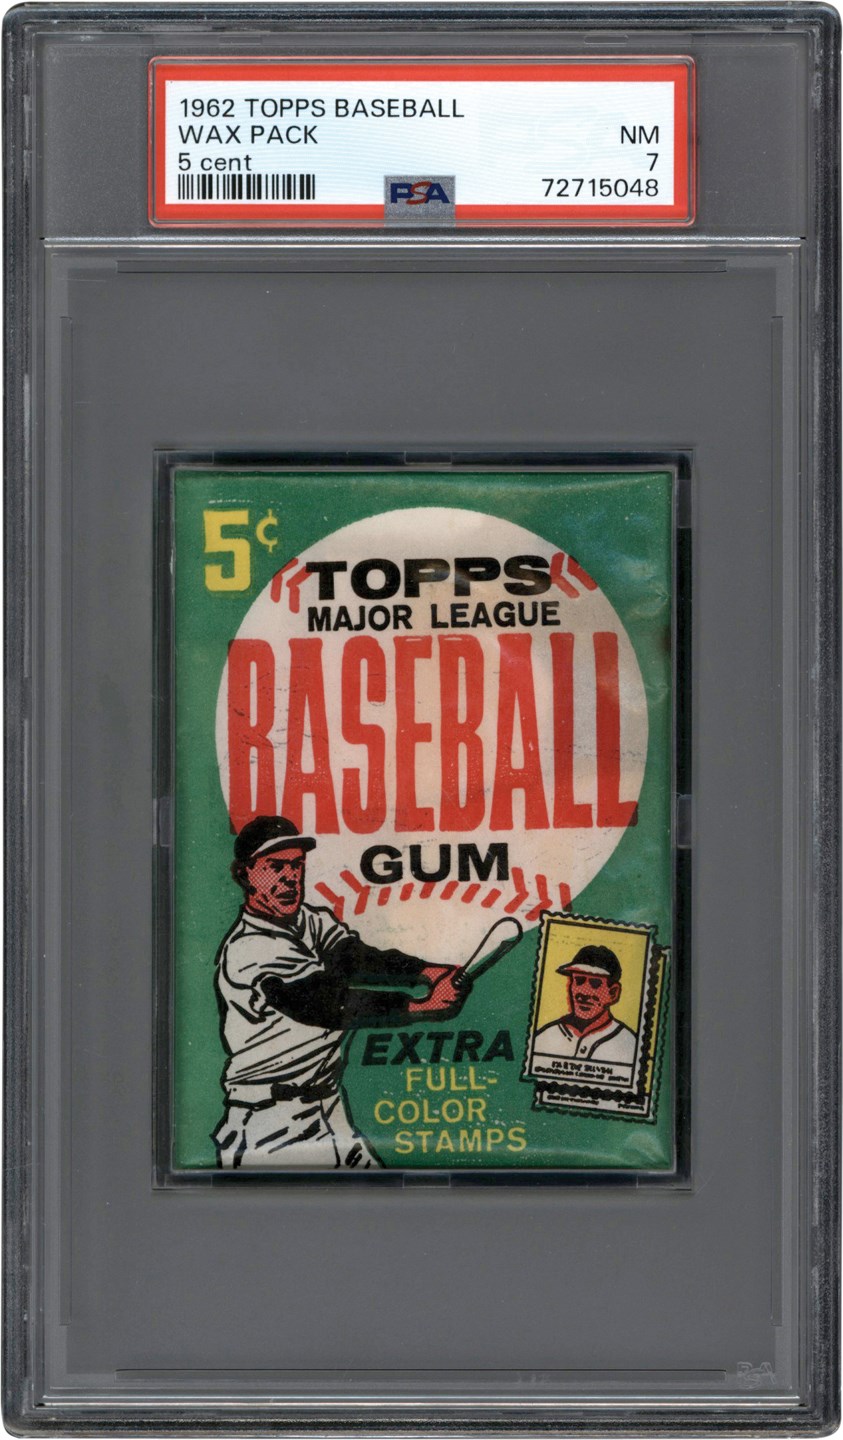 Unopened Boxes, Packs And Cases - 1962 Topps Baseball 5-Cent Wax Pack PSA NM 7